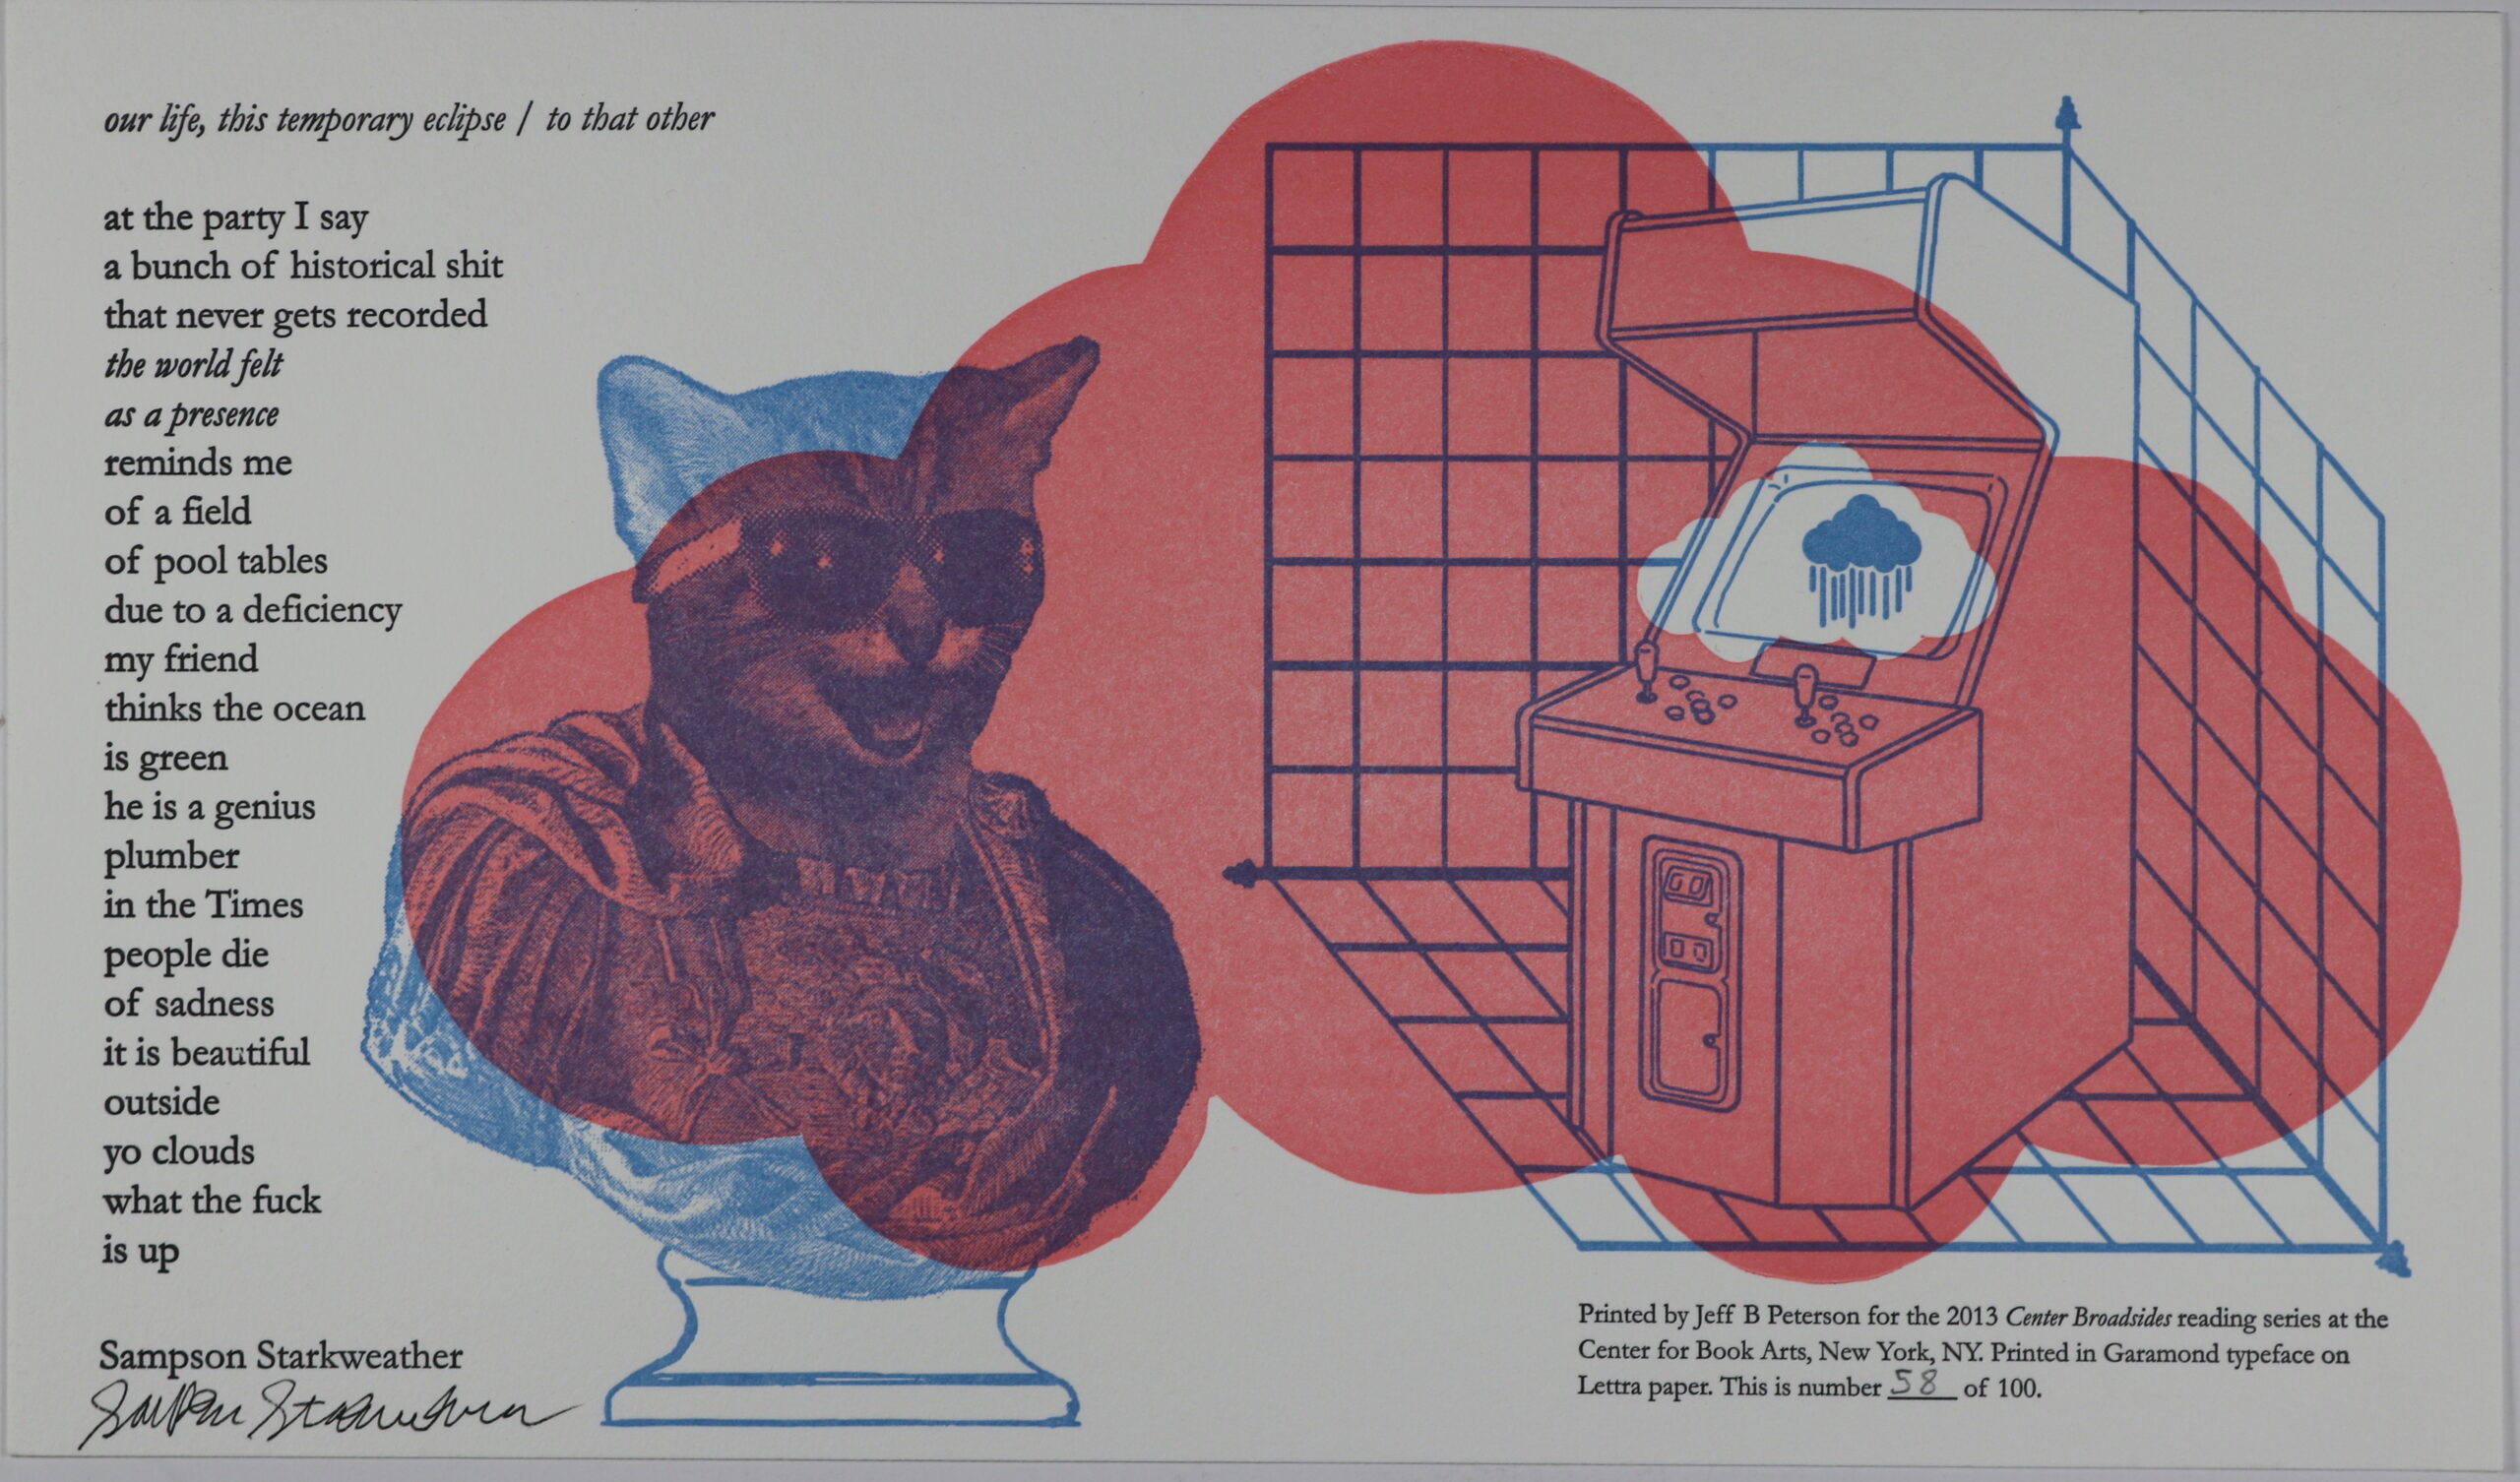 Broadside with a white background, title in small script-like font, text centered towards the left, below the title. Right side of the broadside has the head of a cat with sunglasses, drawn as if part of the head of a Greek statue, colored blue. Next to that is an arcade machine with a raining cloud drawn on the screen. The arcade machine is surrounded by walls made of squares. Both the cat and the arcade machine are drawn inside of a pink cloud.